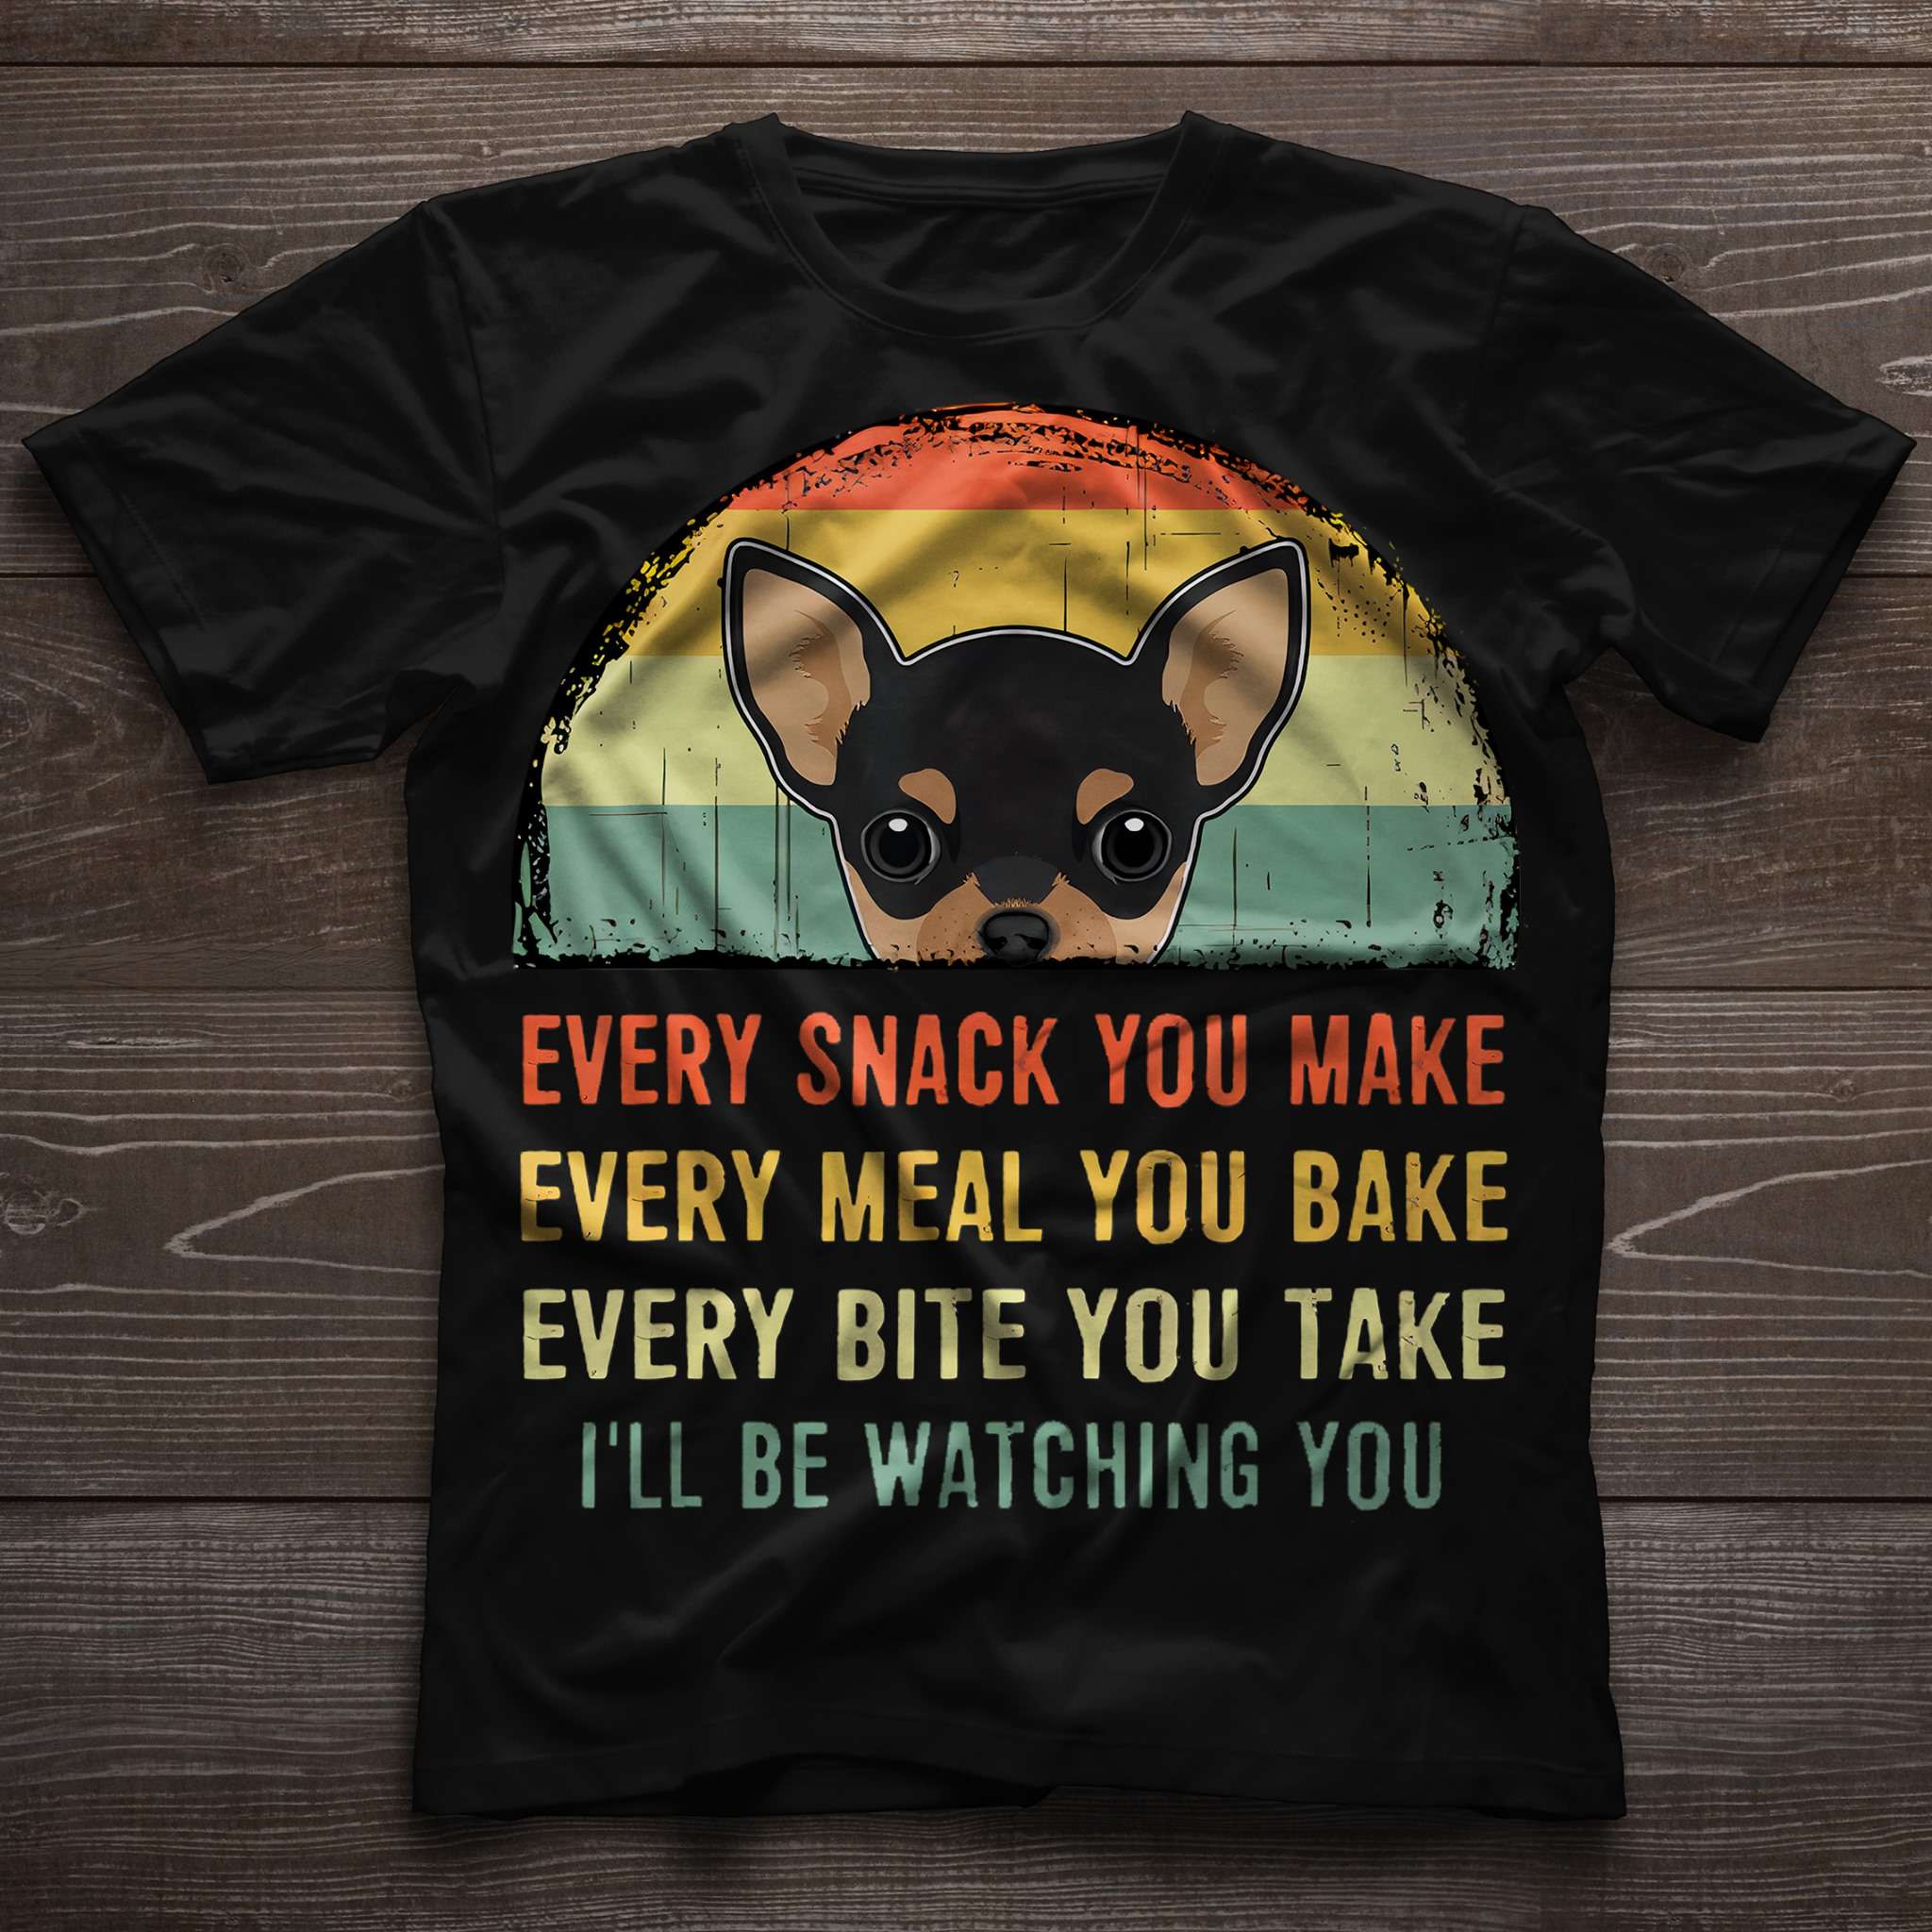 Every snack you make, every meal you bake, every bite you take - Chihuahua dog lover